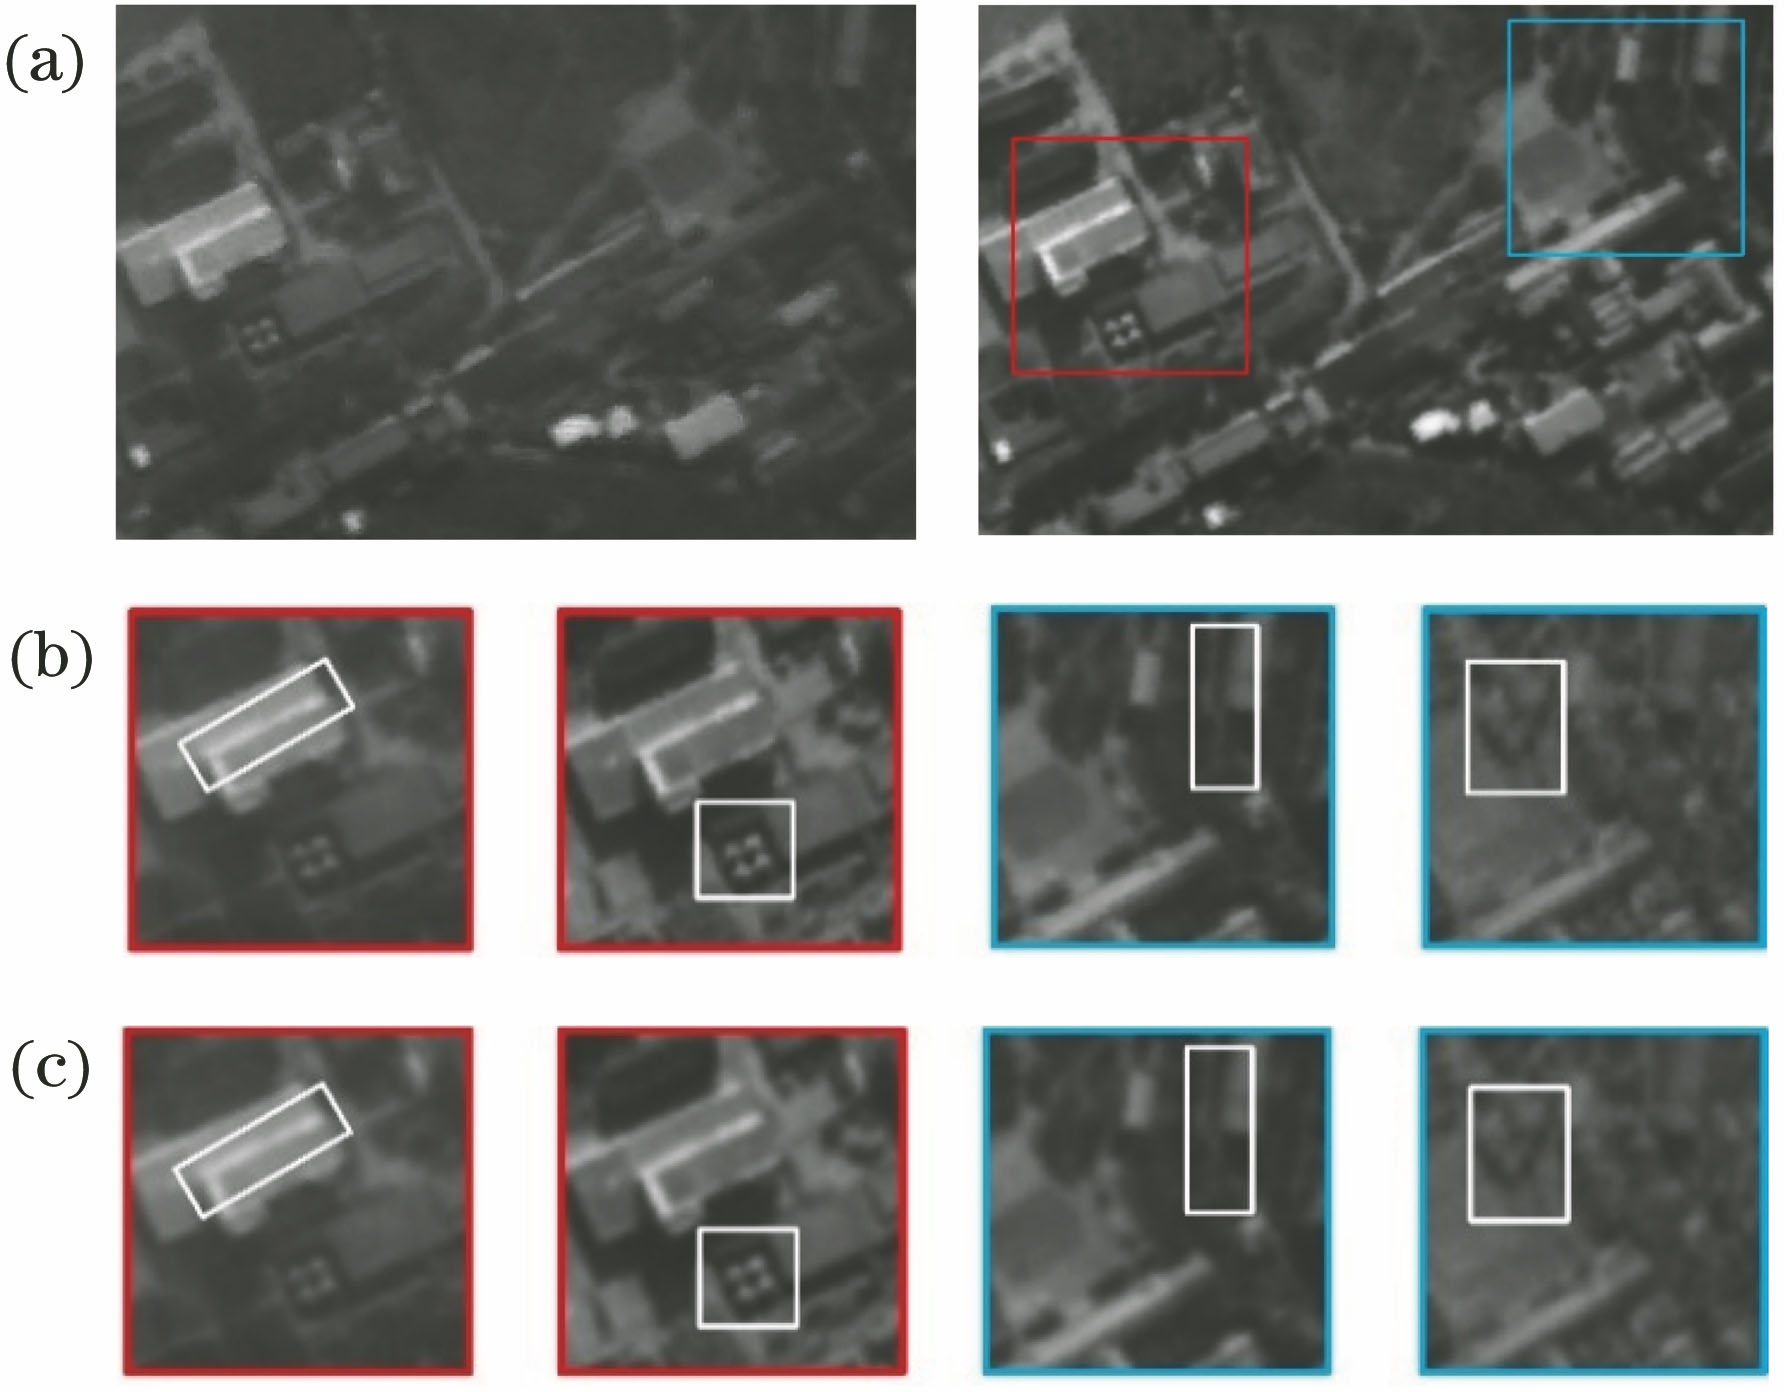 Super-resolution reconstruction effects of 25th, 50th, 75th and 100th band images. (a) Hyperspectral image; (b) hyperspectral super-resolution image; (c) scene image blocks for hyperspectral image; (d) scene image blocks for hyperspectral super-resolution image